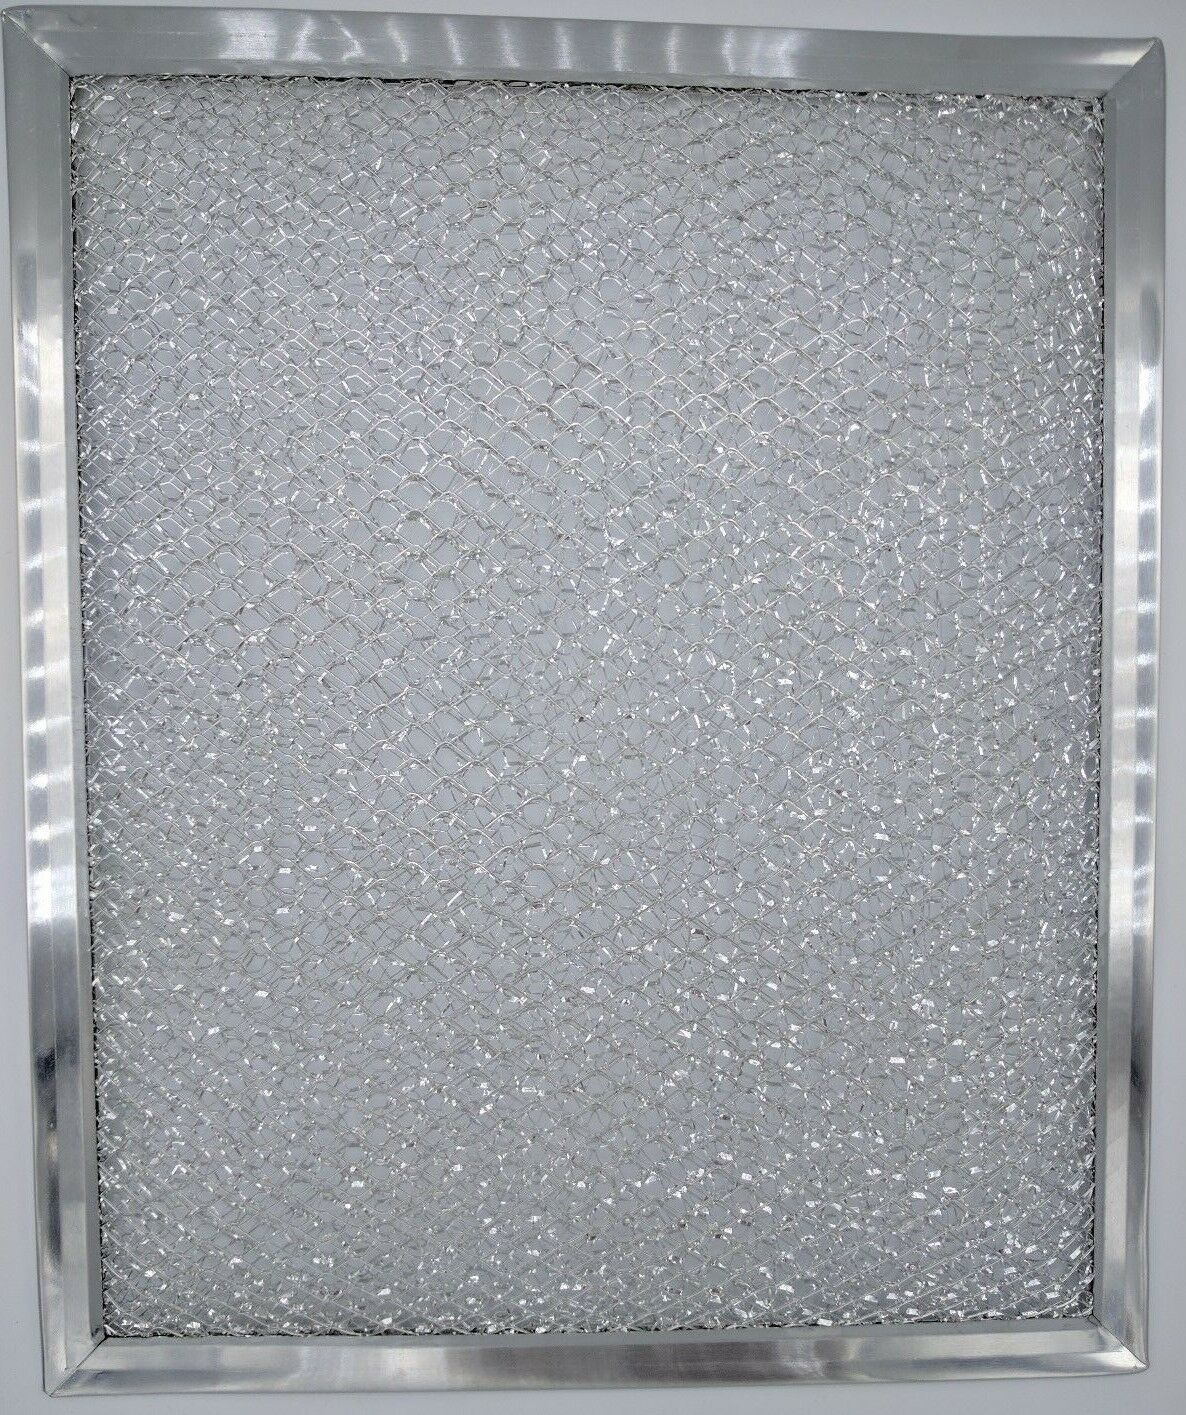 Primary image for Replacement 97006931 Aluminum Range Hood Grease Mesh Filter, Fits Broan & Nutone